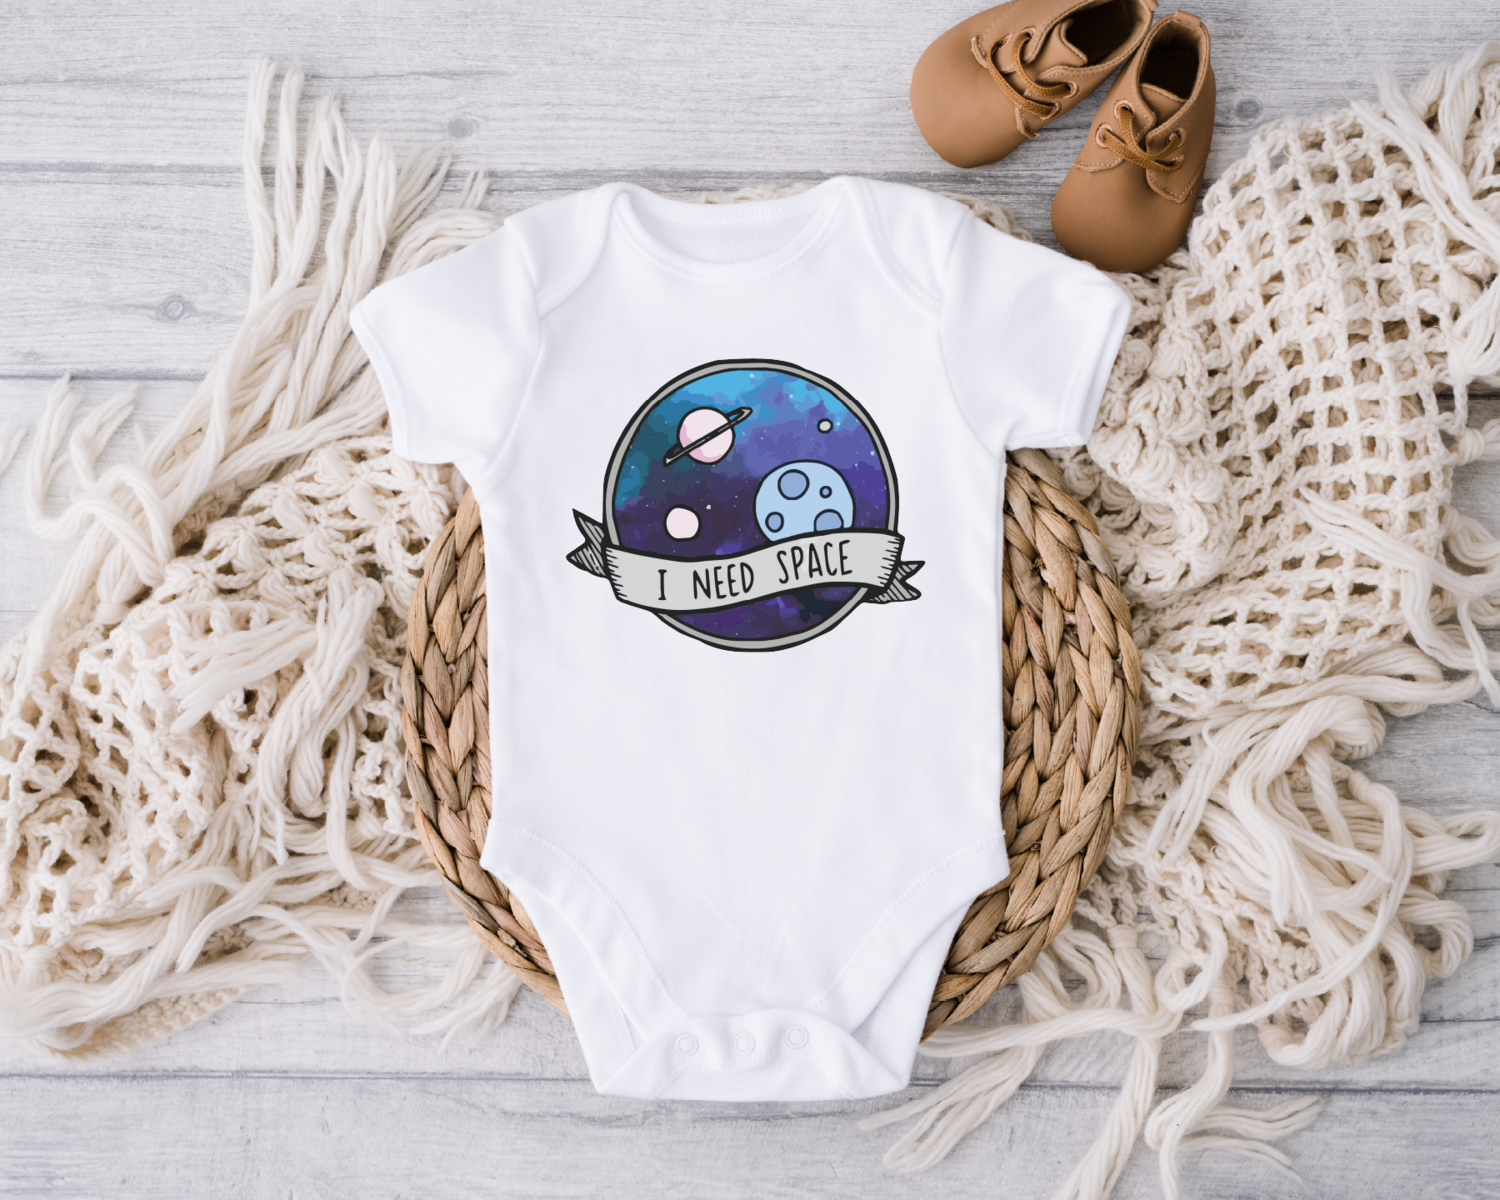 I Need Space Onesie, Planet Toddler Shirt, Space Baby Bodysuits